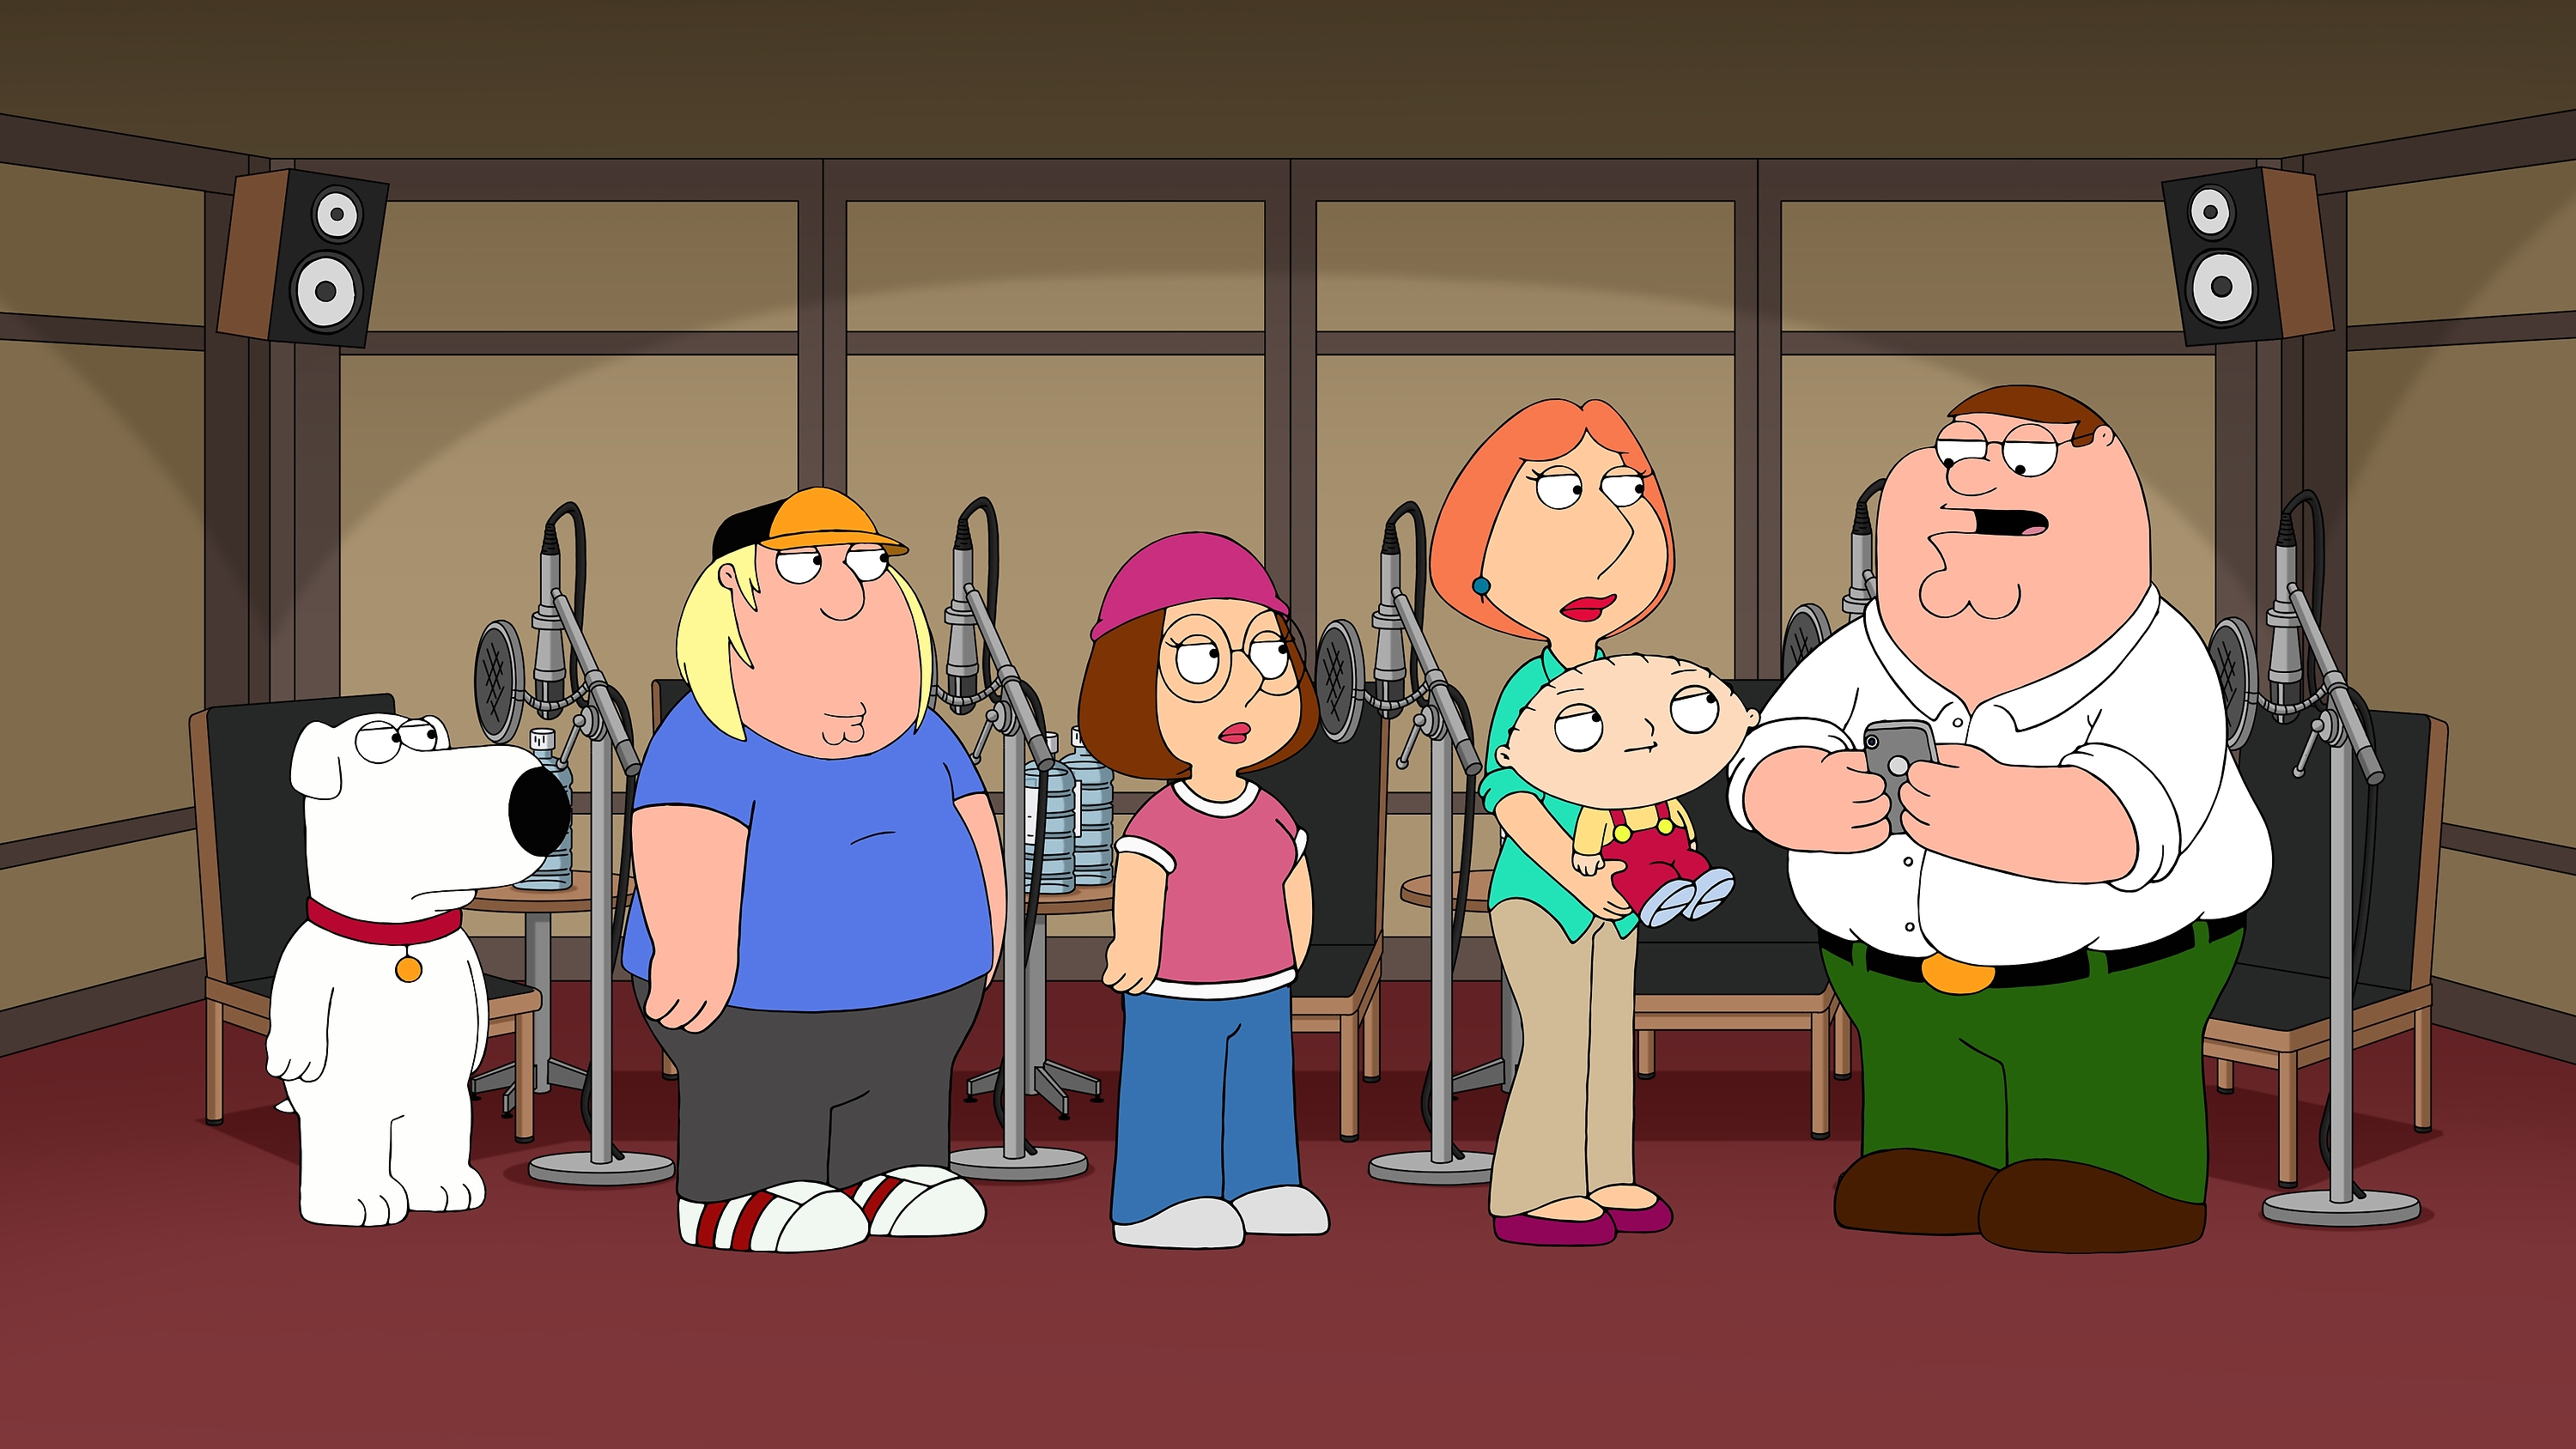 A 'Family Guy' scene featuring the Griffin family in a recording booth from the show's 16th season.